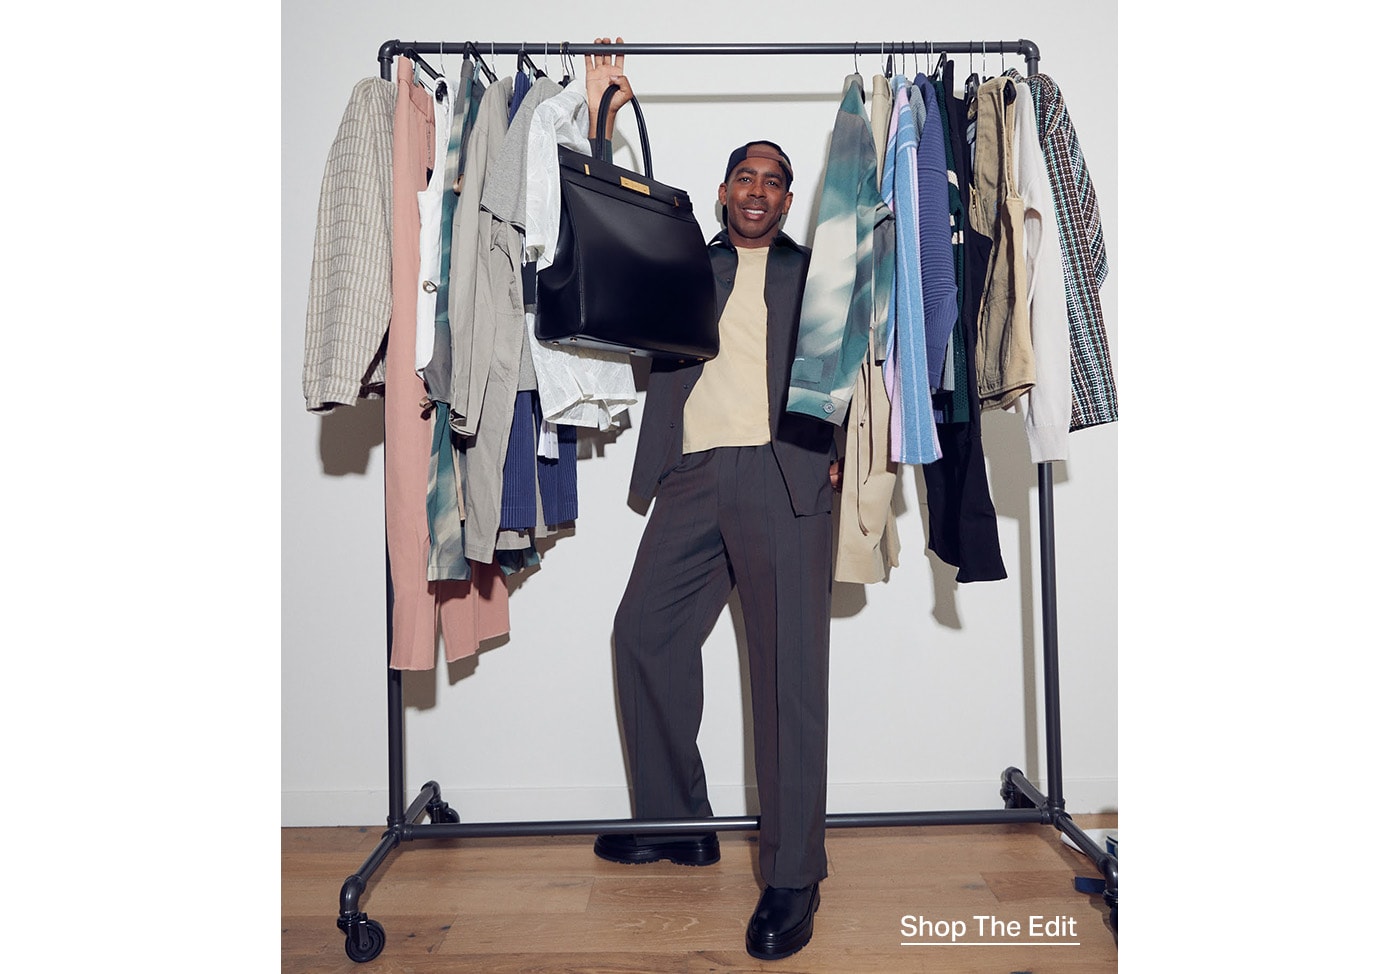 Jason Bolden posing under a clothes rack filled with essential pieces picked by Jason Bolden.